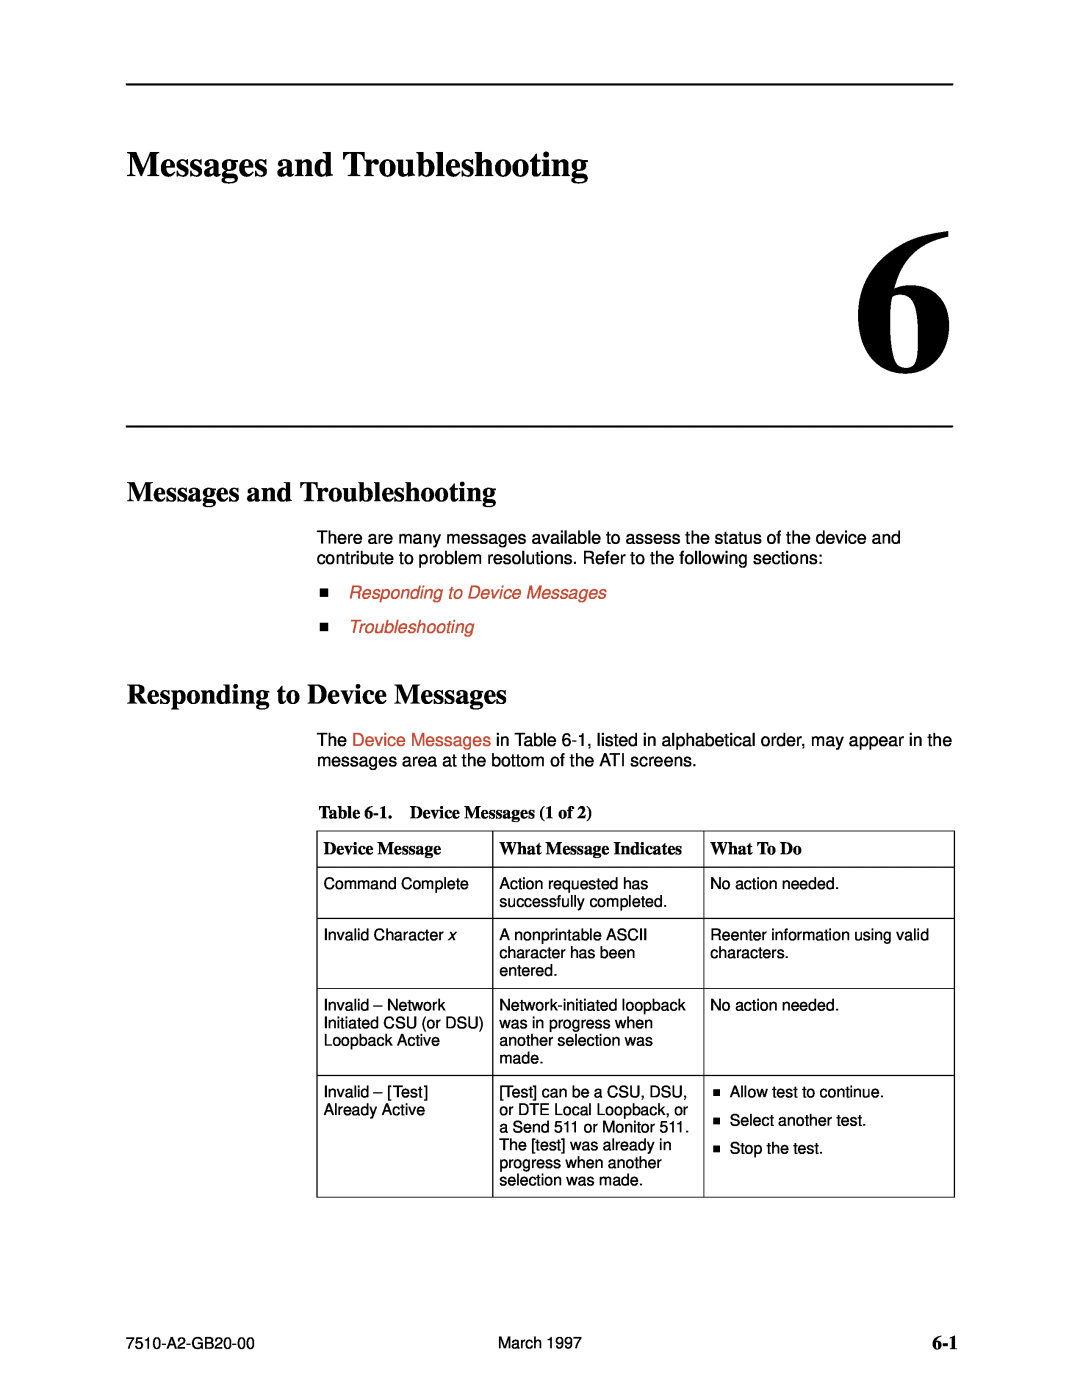 Paradyne 727 manual Messages and Troubleshooting, HResponding to Device Messages HTroubleshooting 